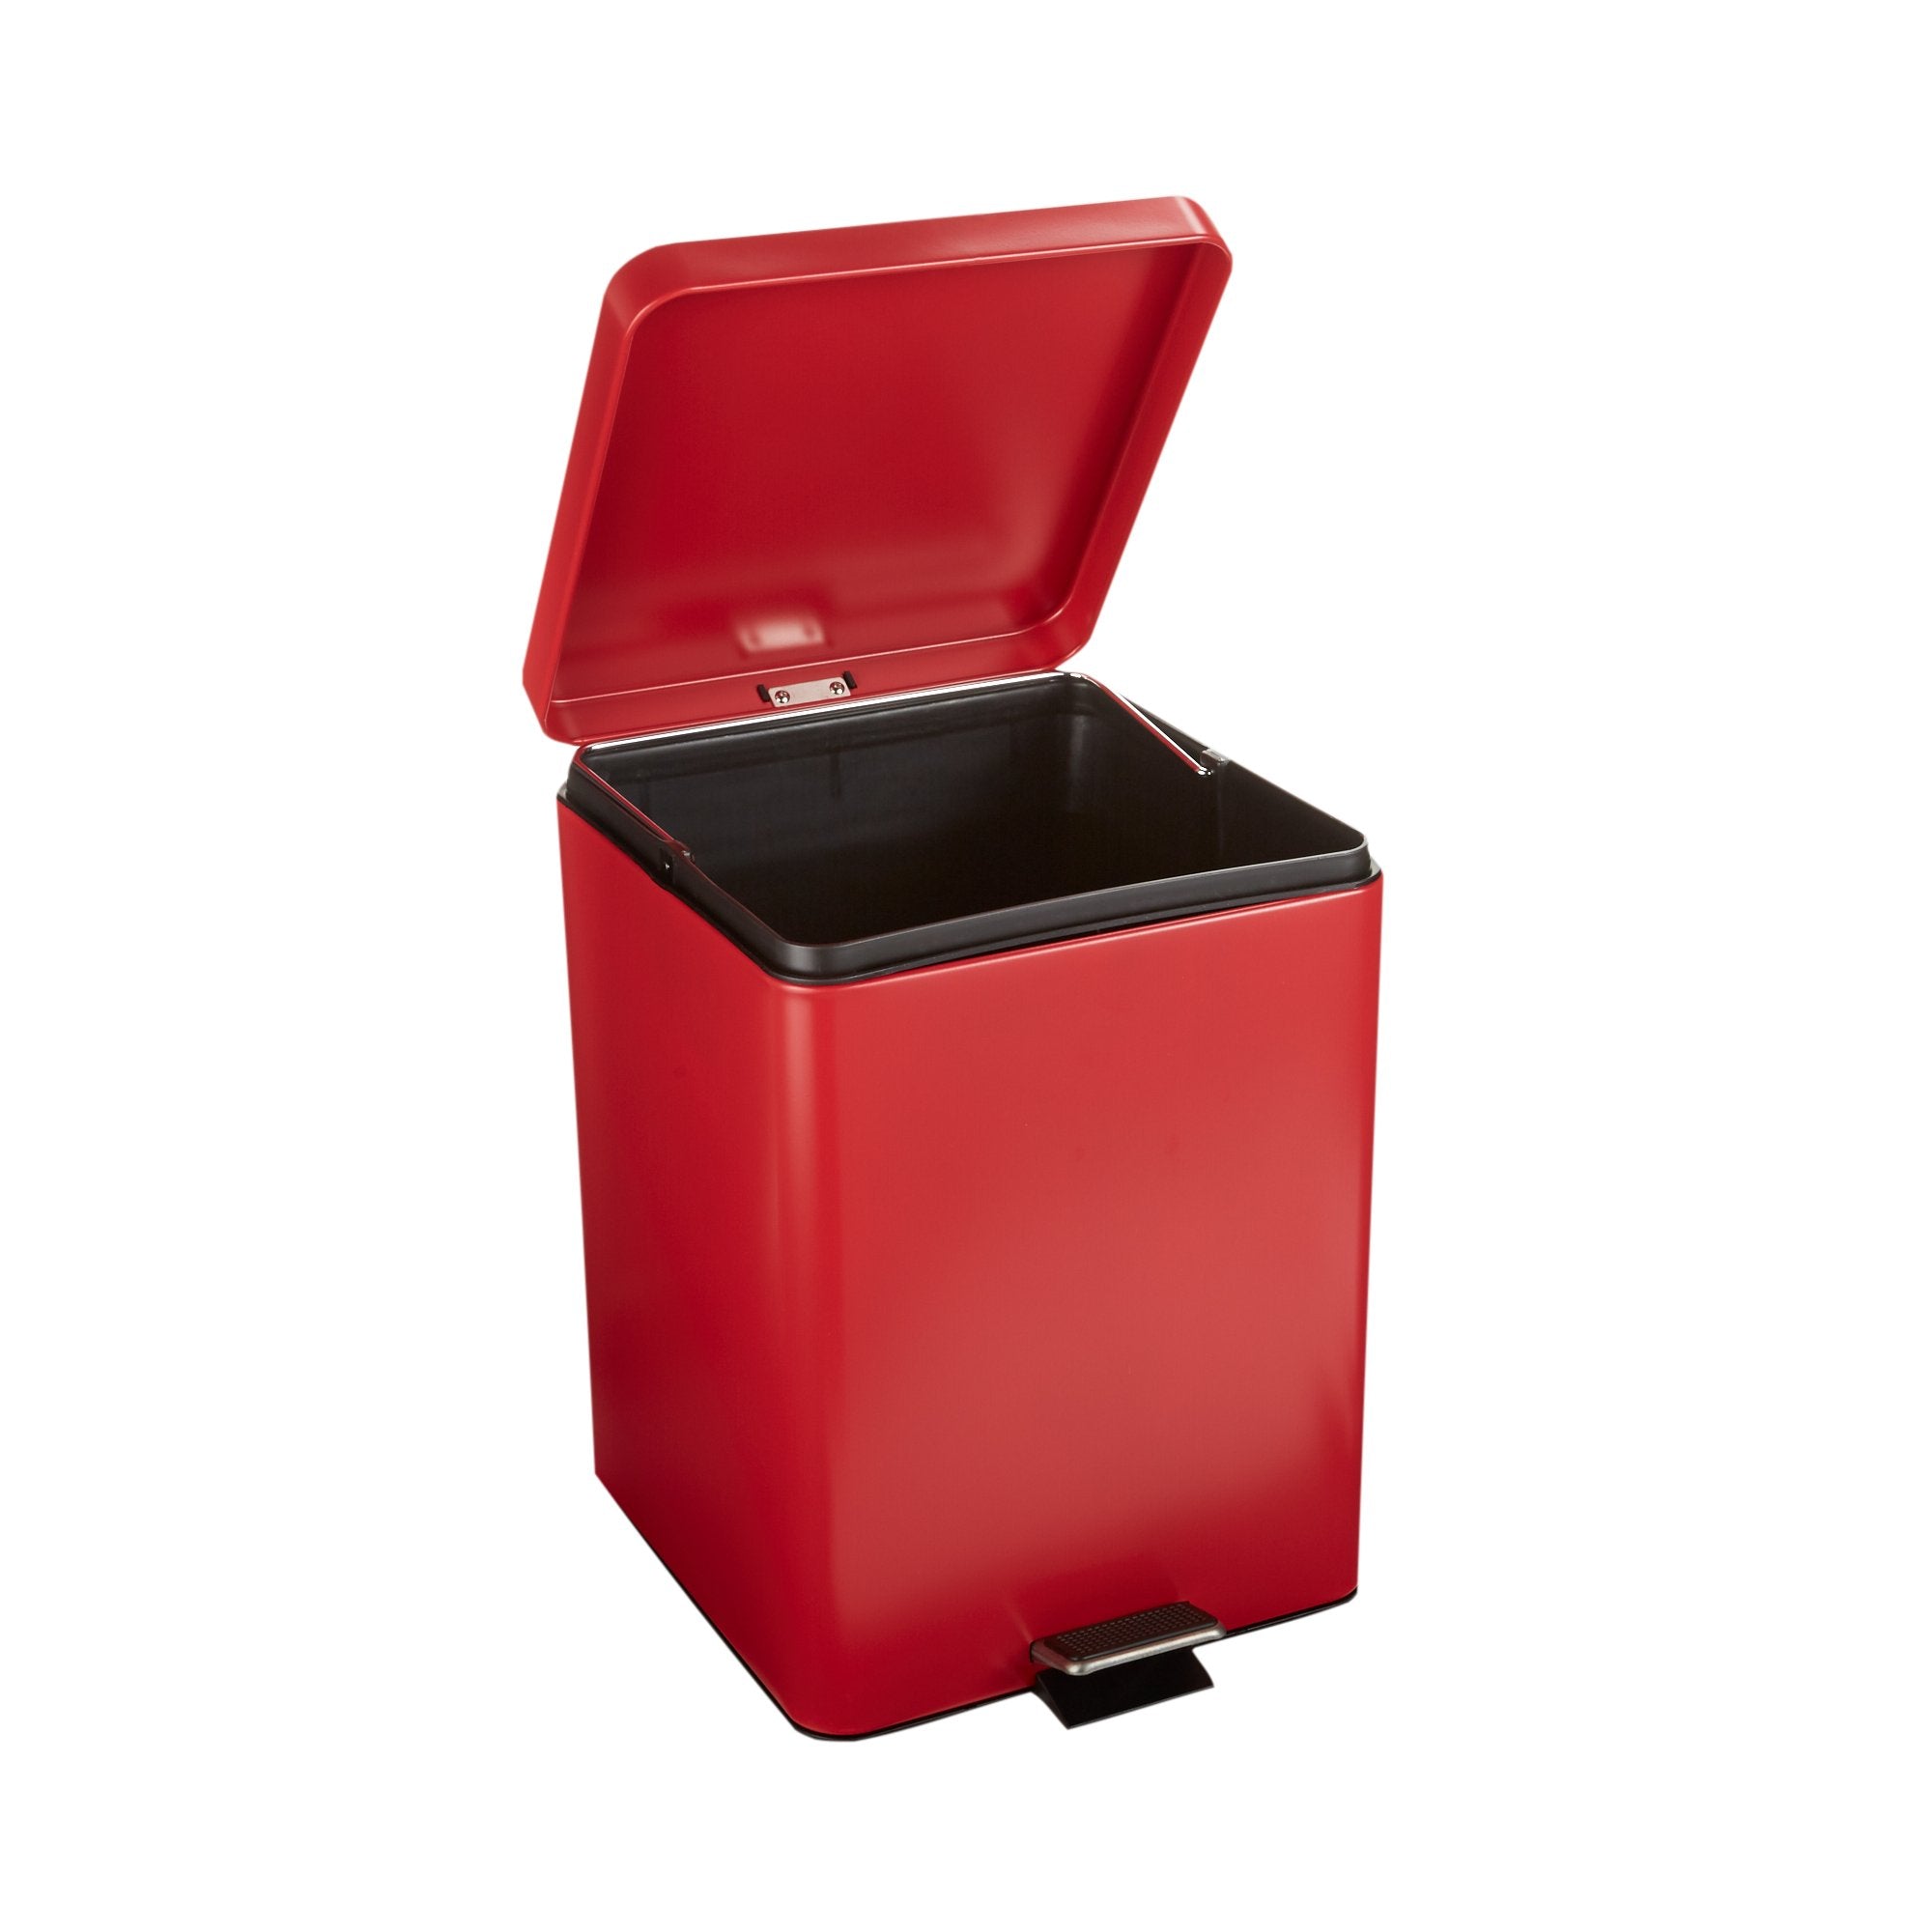 McKesson Trash Can with Plastic Liner, Square, Steel, Step-On, 20 QT, Red (1 Unit)